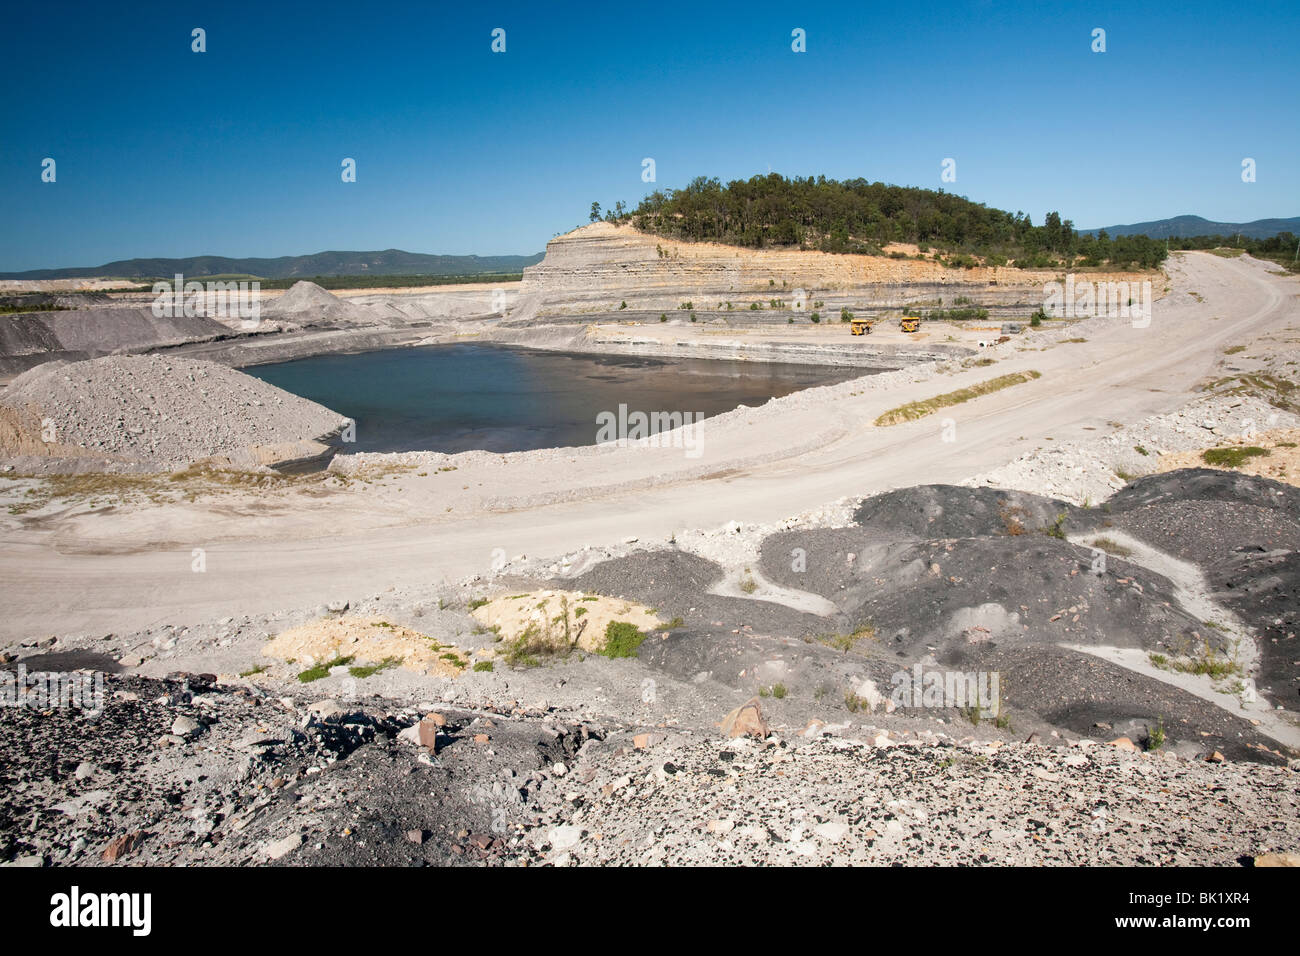 An open cast or drift coal mine managed by Xstrata coal in the Hunter Valley, New South Wales. Stock Photo